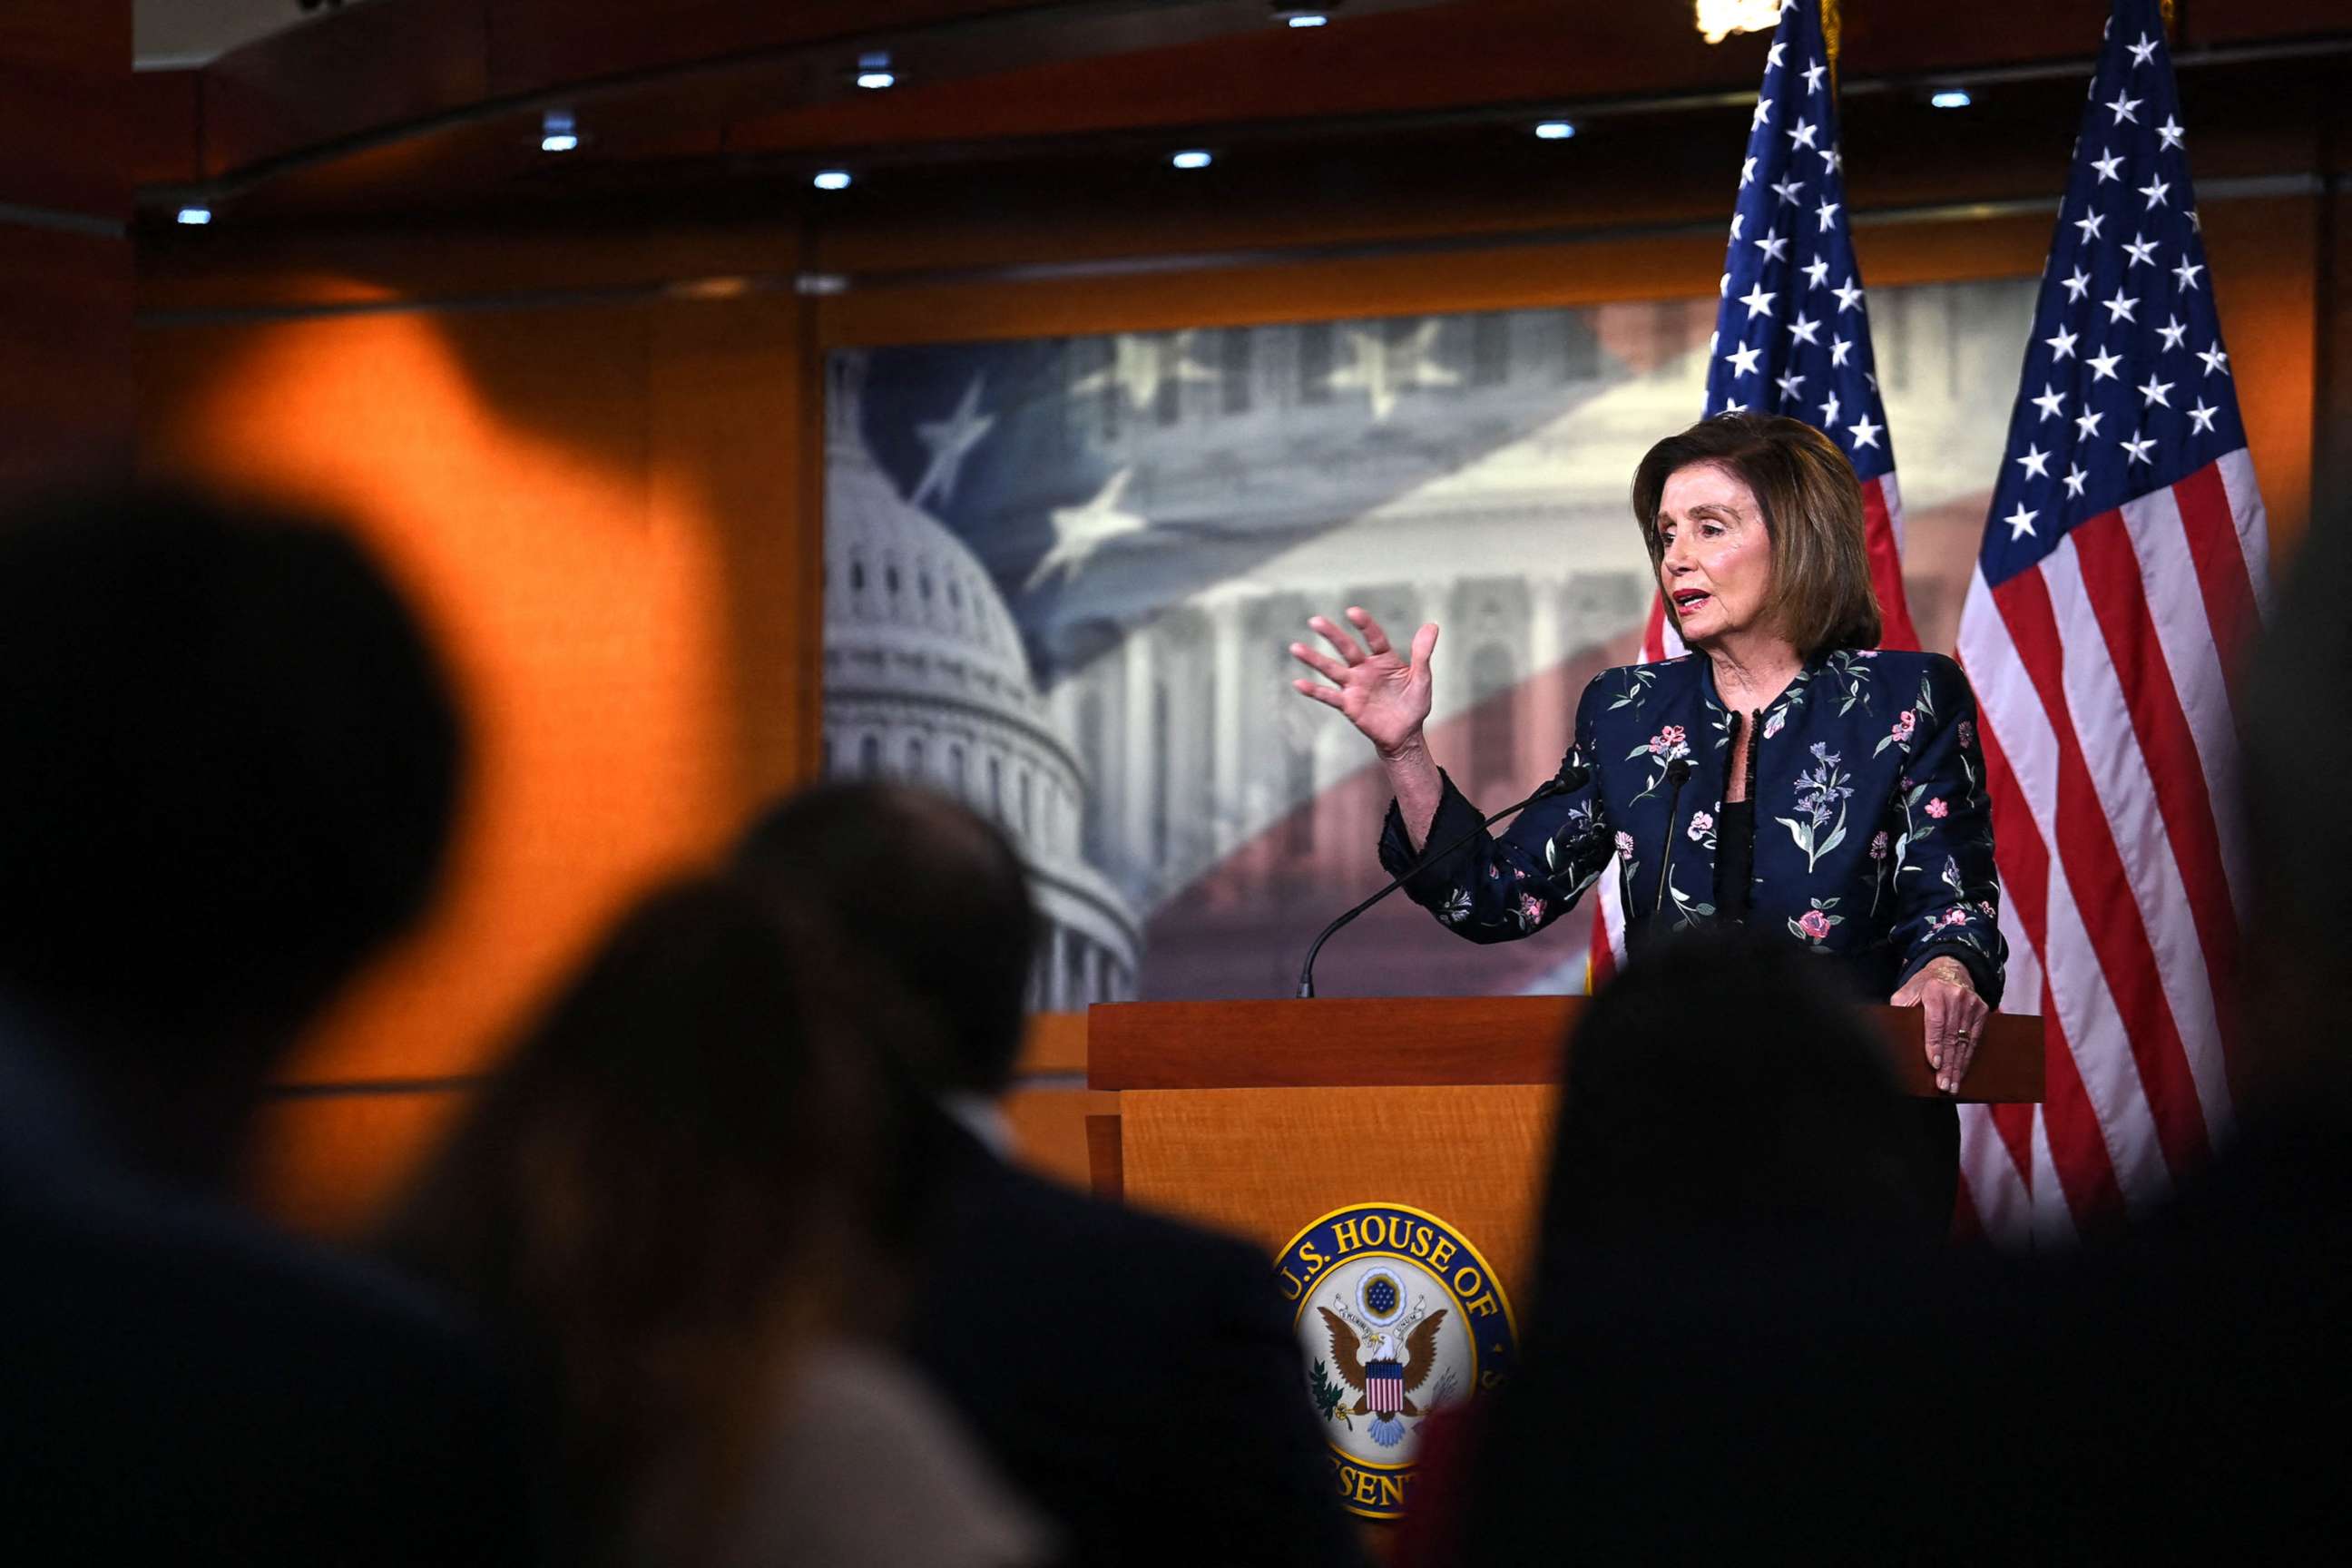 PHOTO: Speaker of the House, Nancy Pelosi speaks at her weekly press briefing on Capitol Hill in Washington, D.C, July 22, 2021.